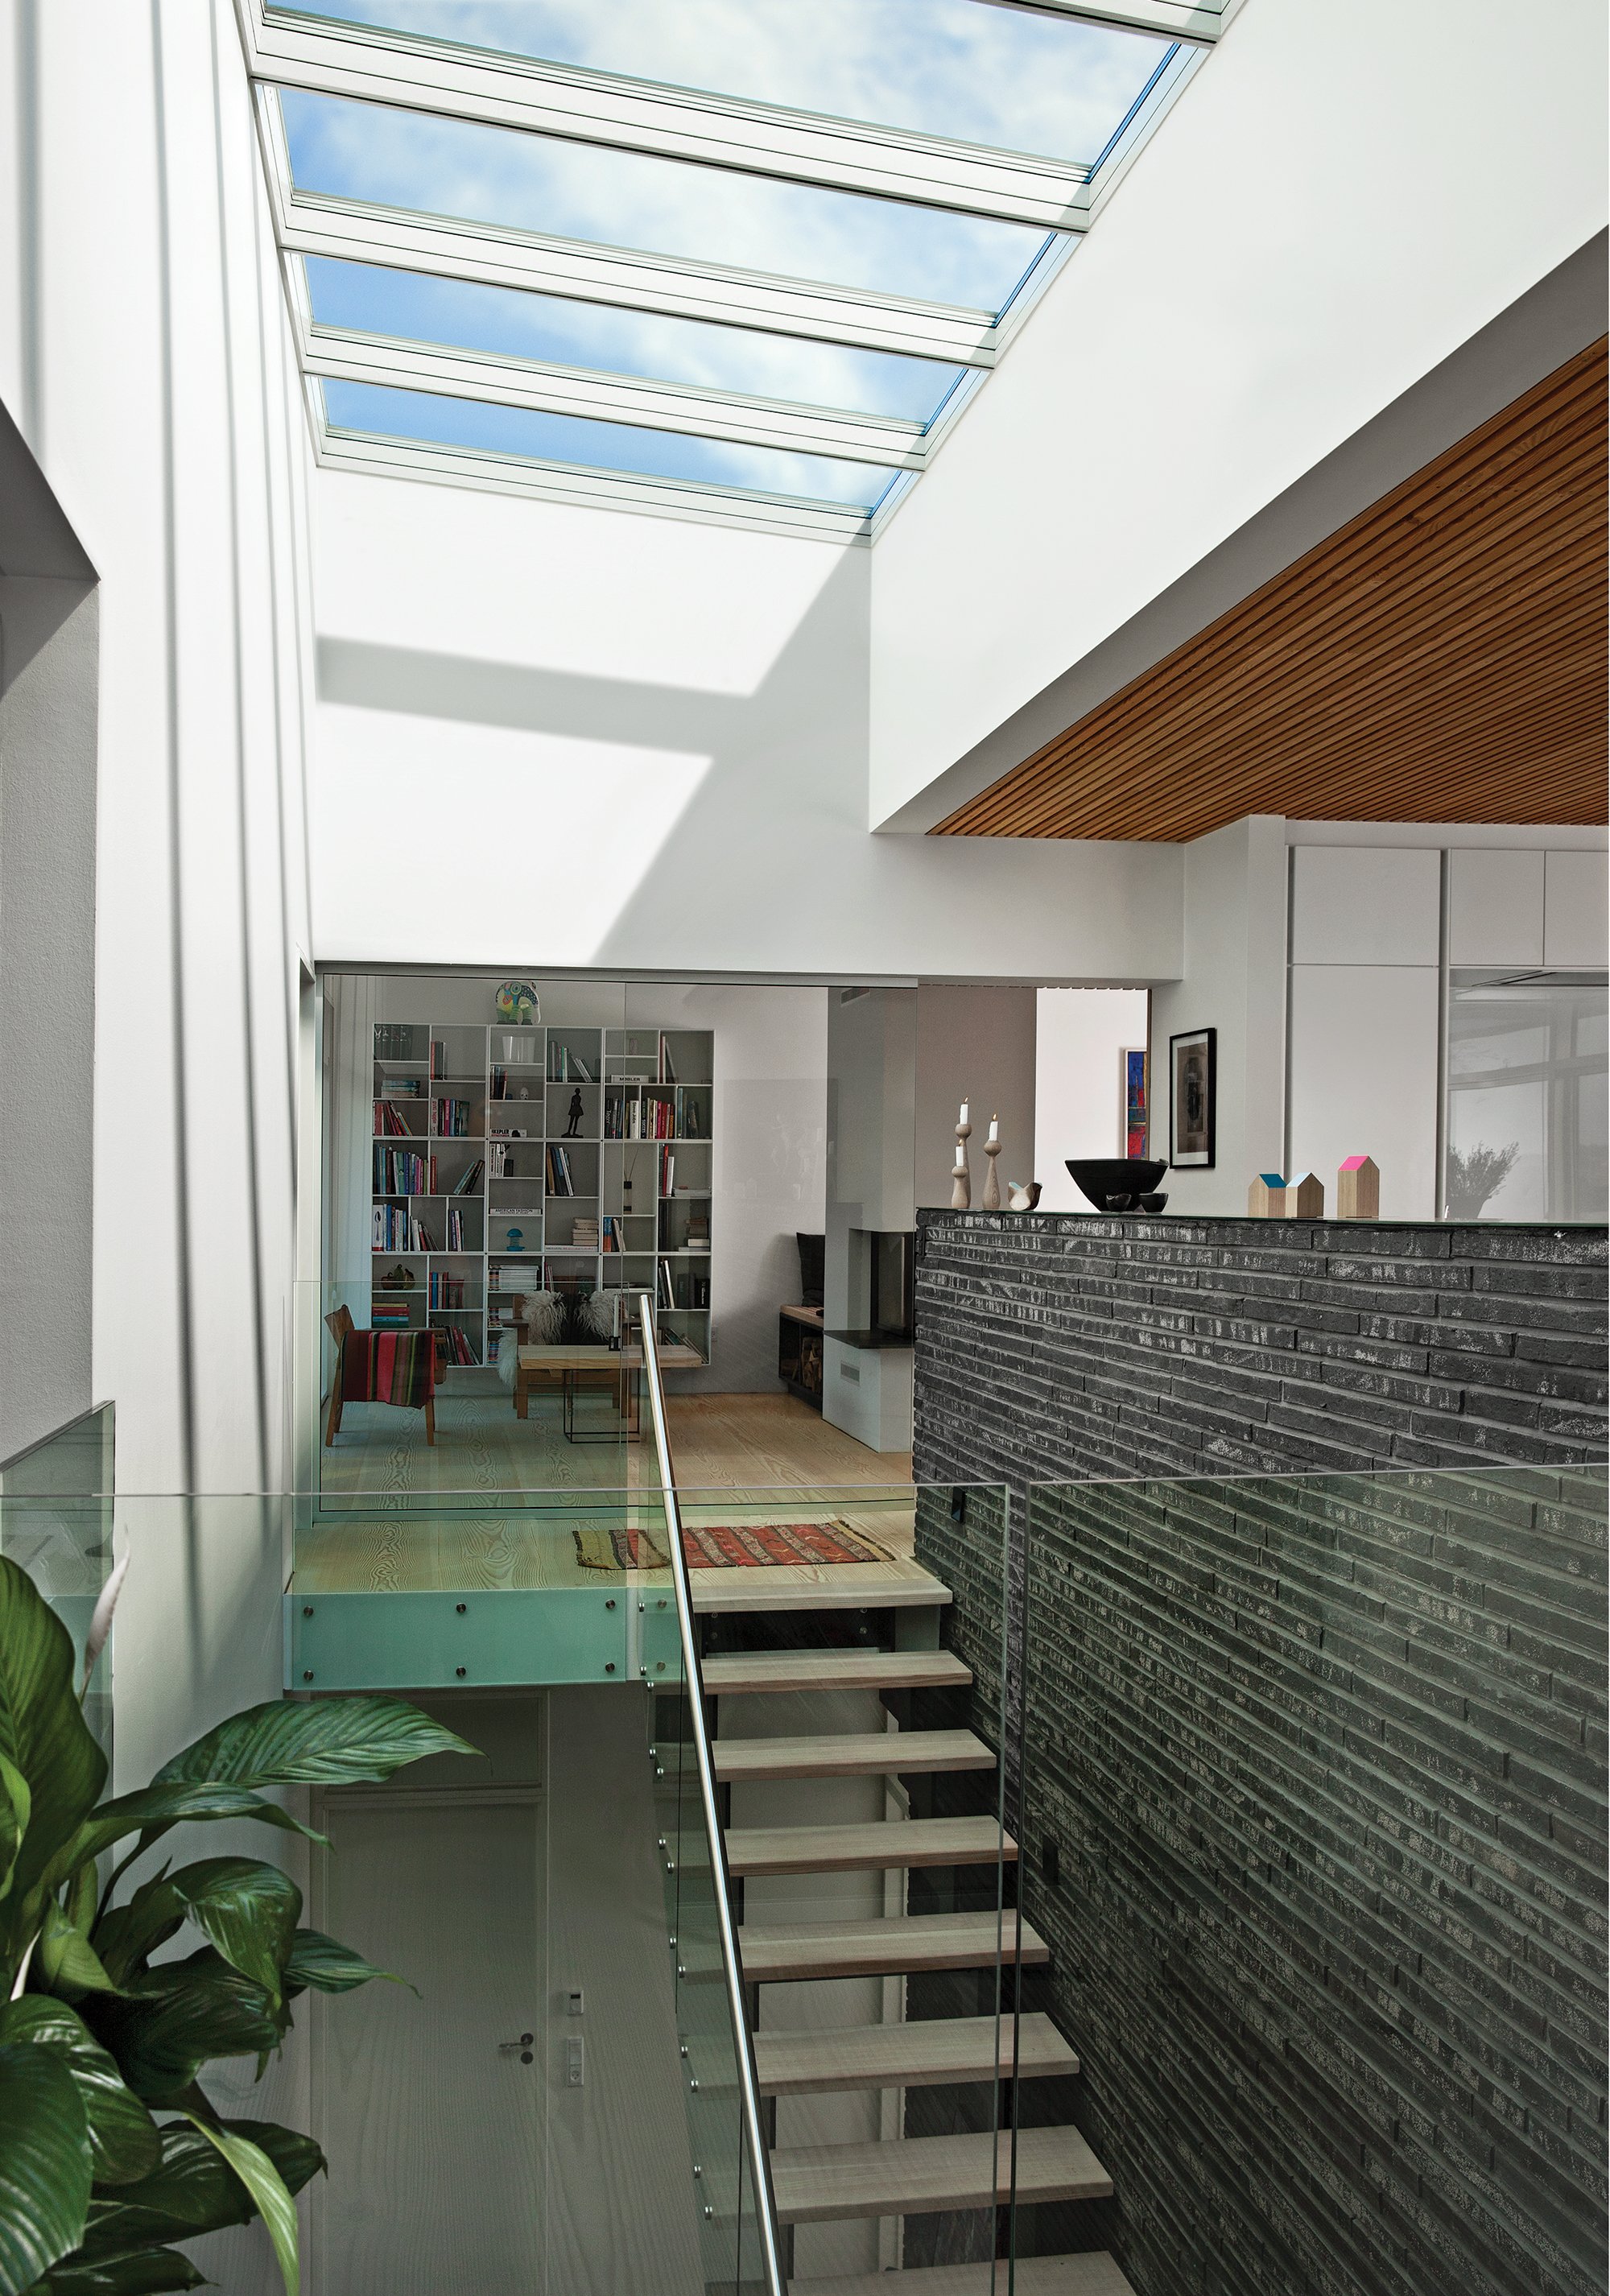 Application-interior-stairwell-3856-Skylights-vms-Small-Spaces-0621.jpg